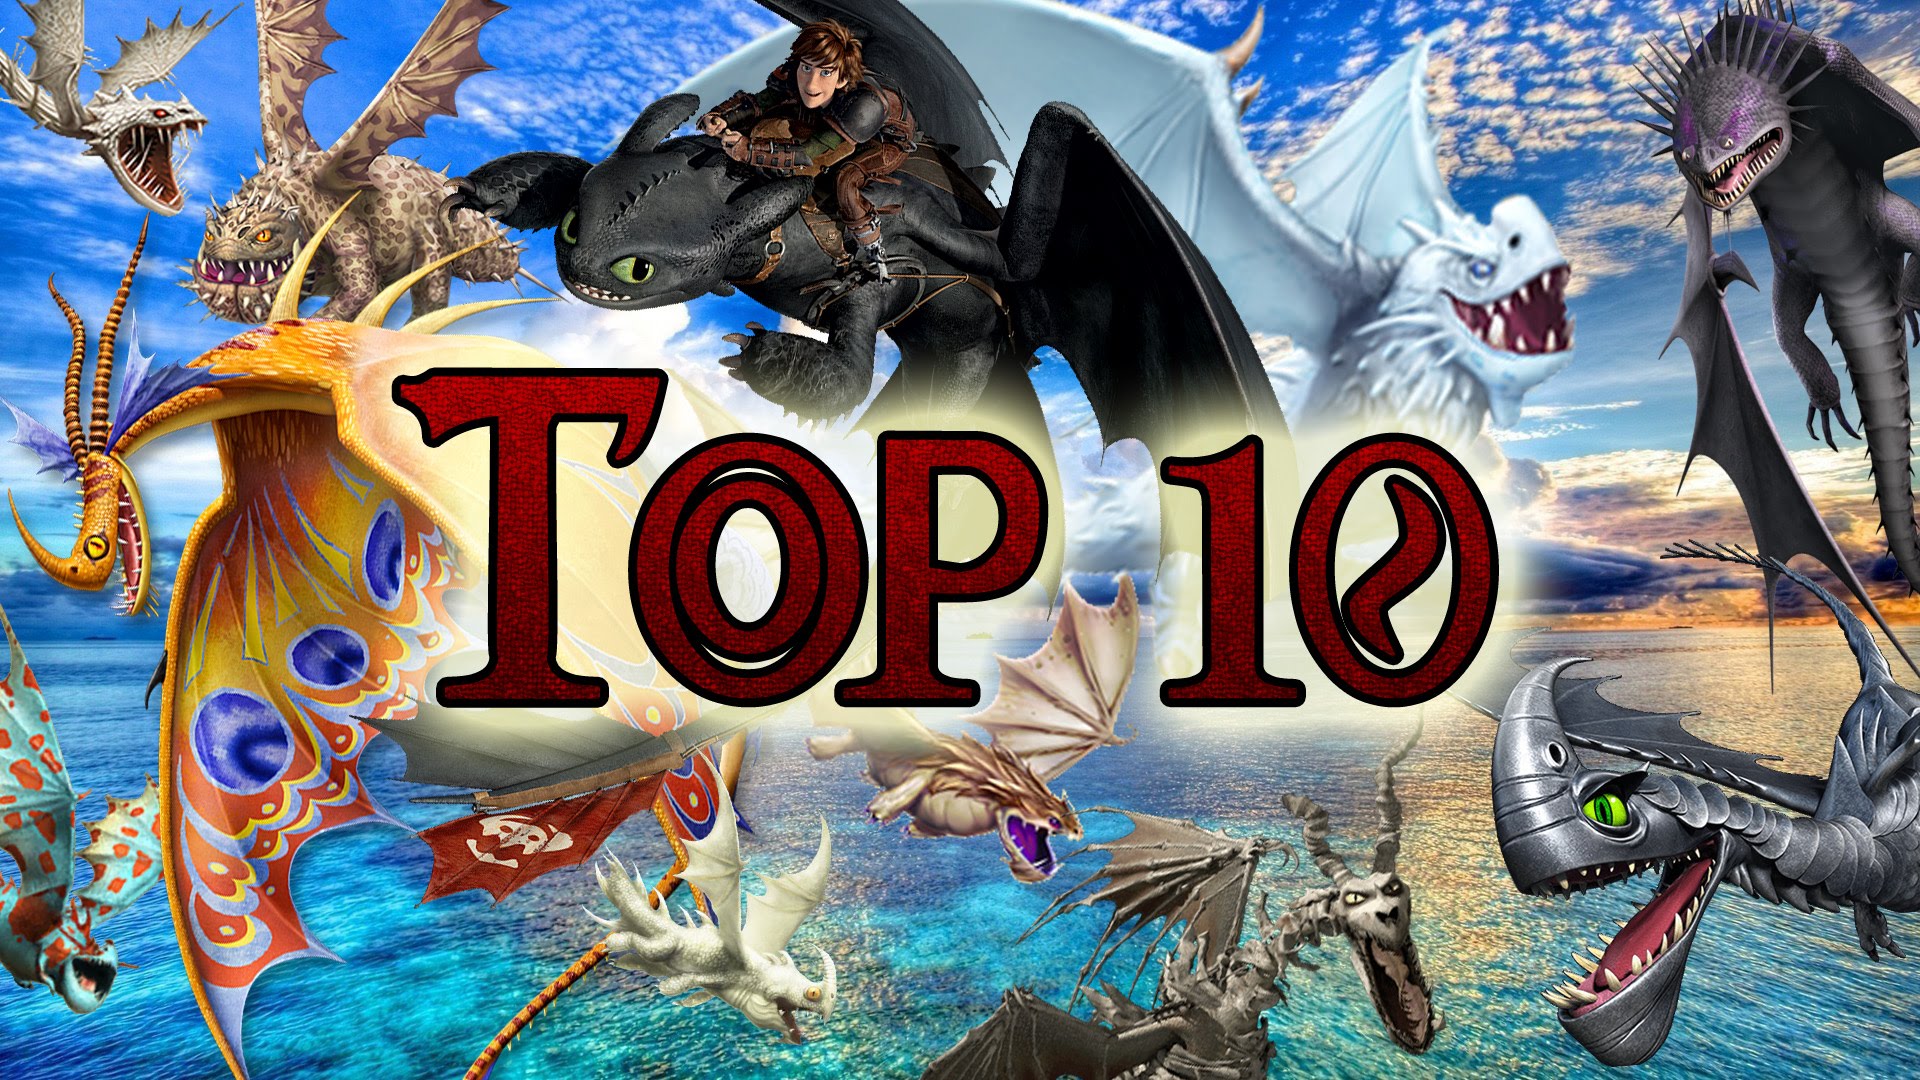 Top 10 Dragons from How to Train Your Dragon